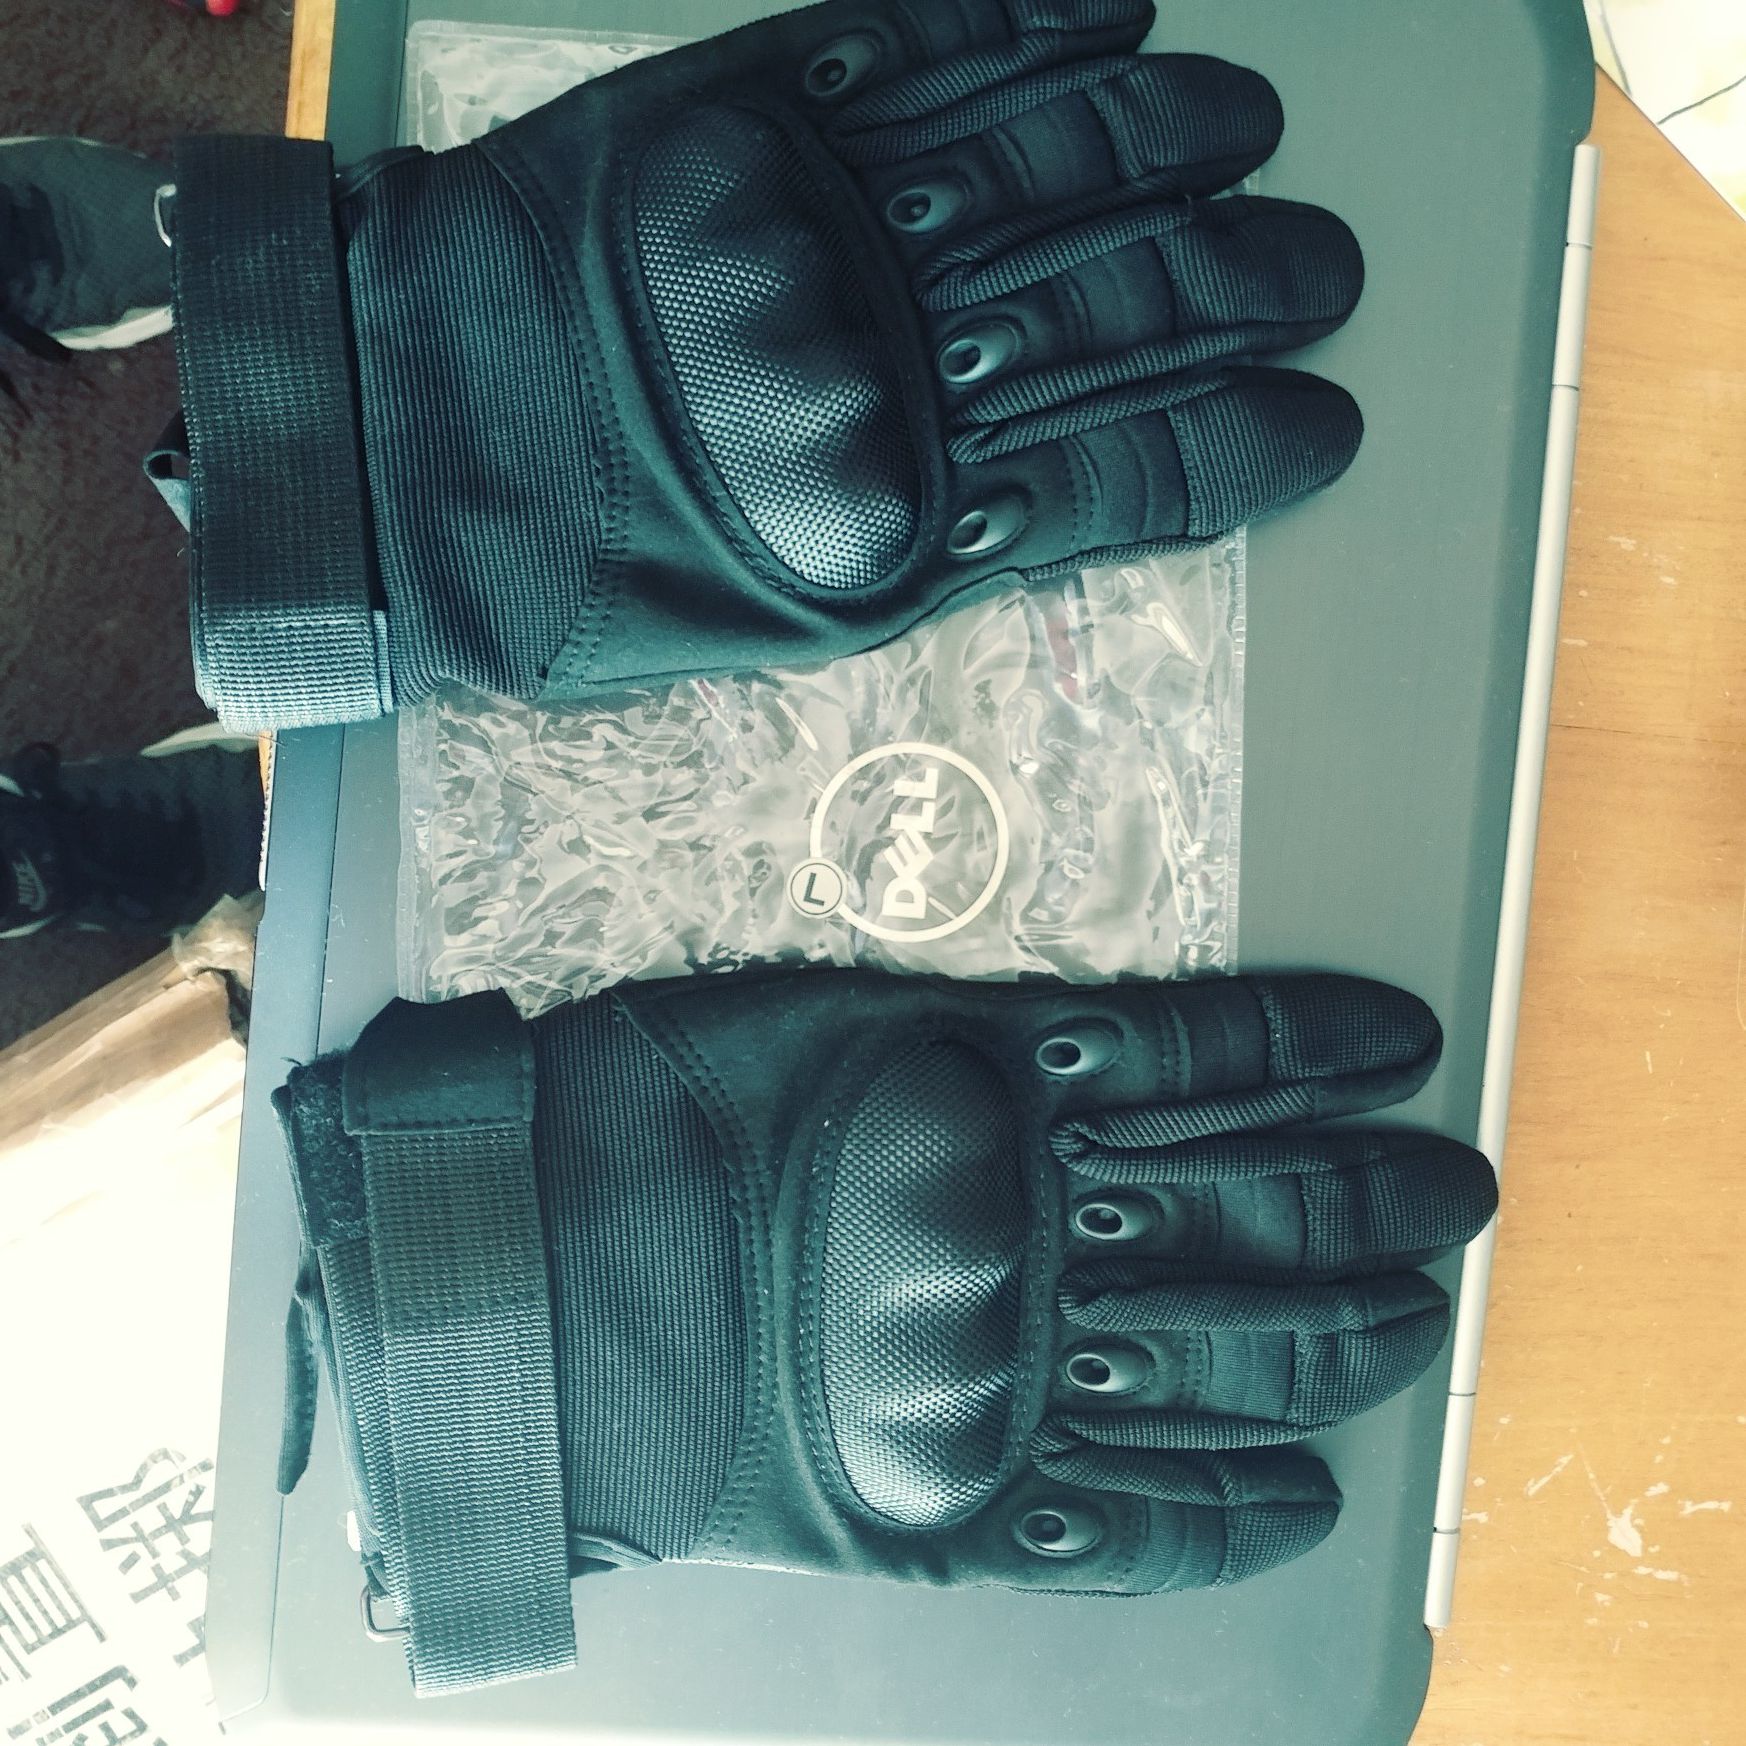 New motorcycle gloves